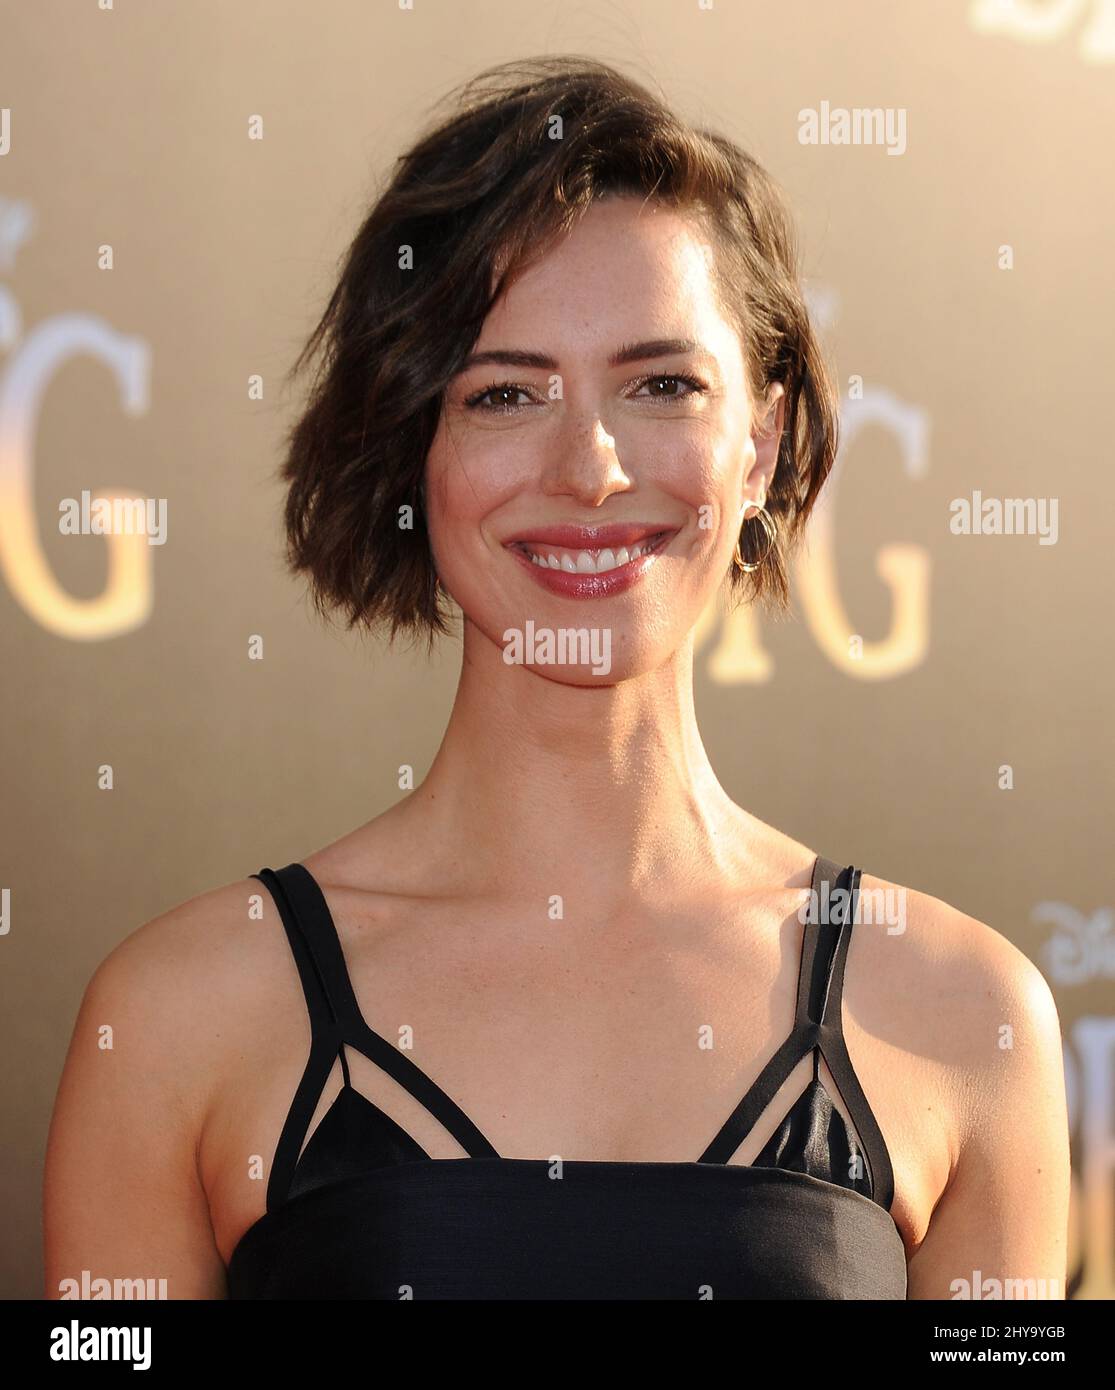 Rebecca Hall attending the premiere of 'The BFG' in Los Angeles. Stock Photo